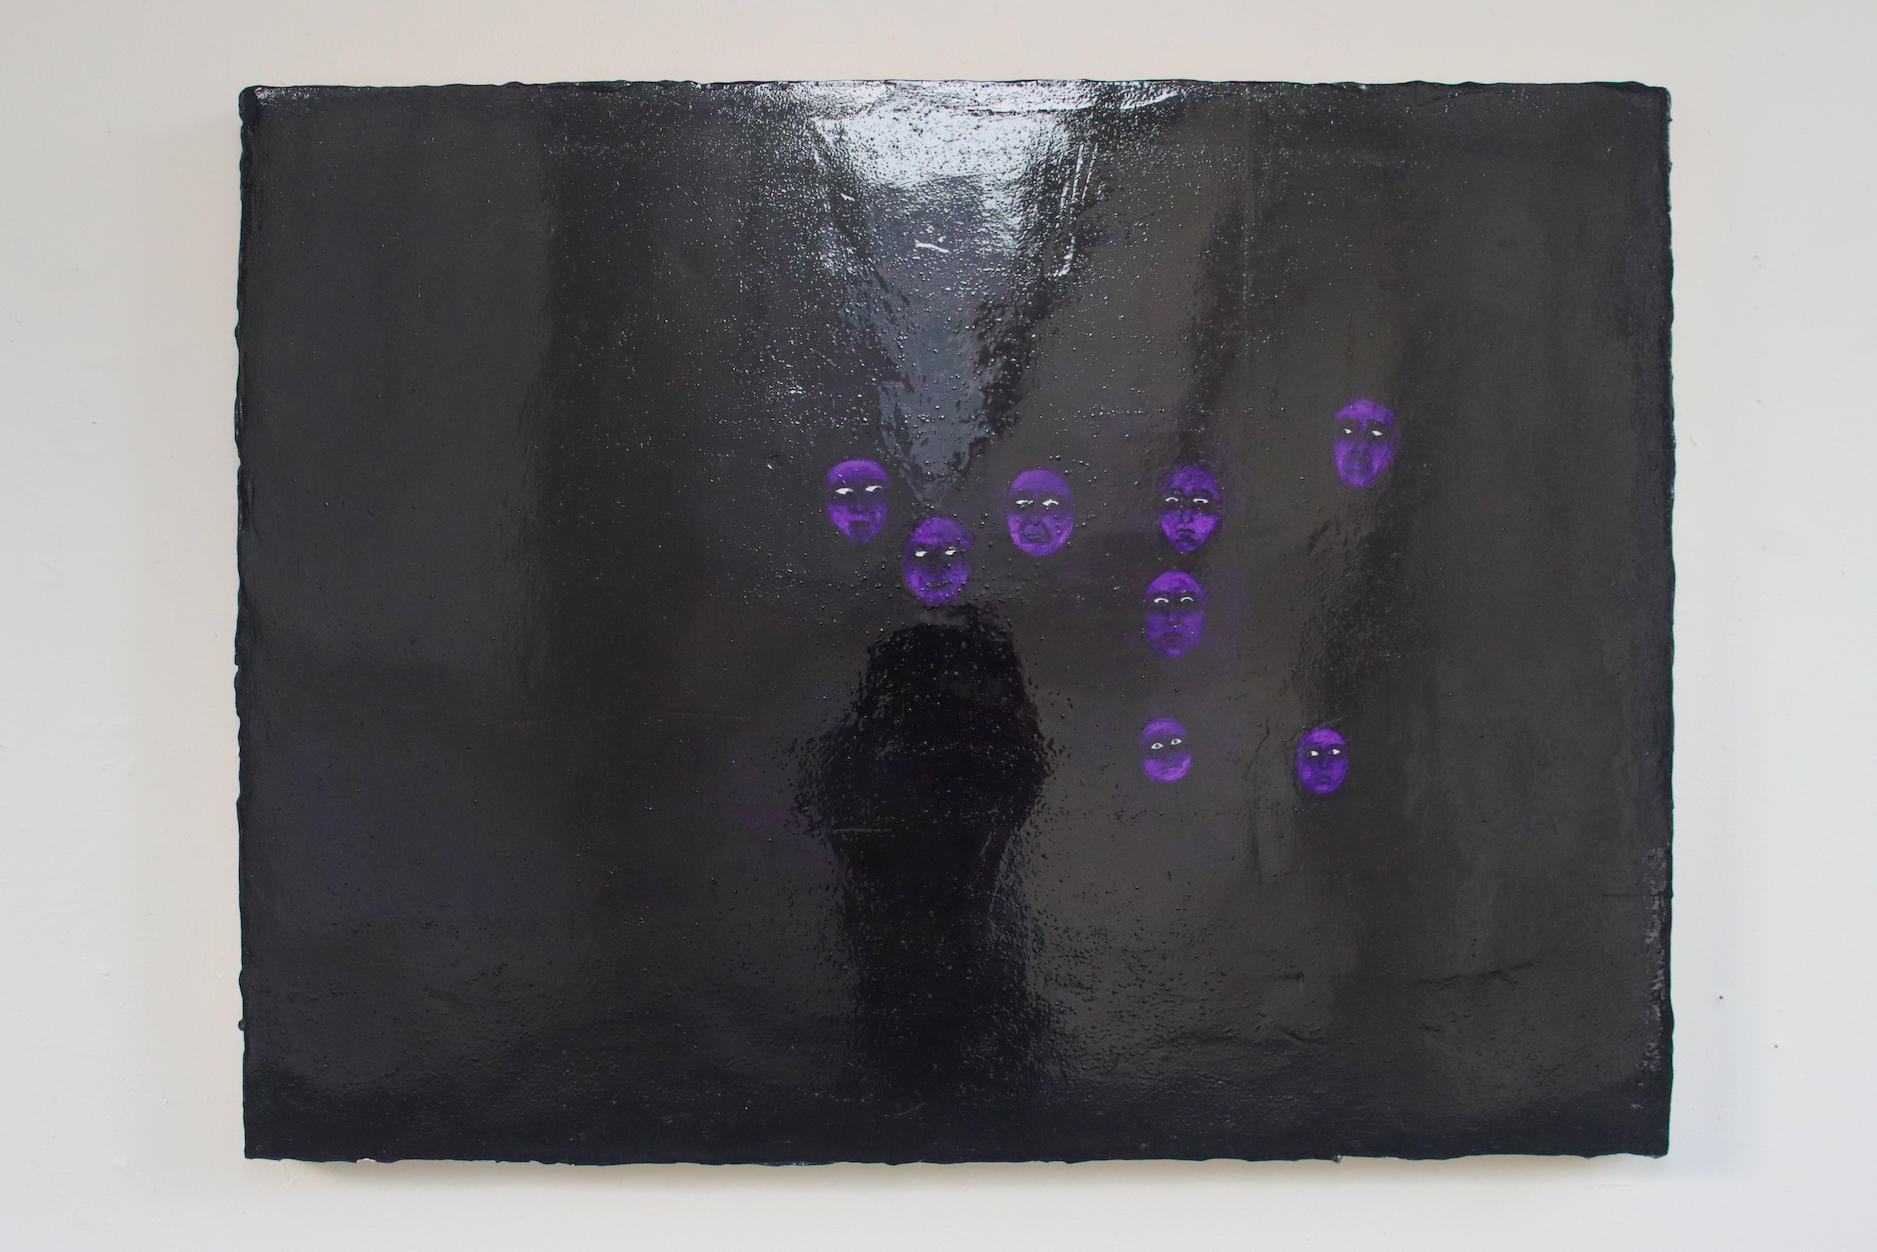 A reflective violet painting with only visible faces 